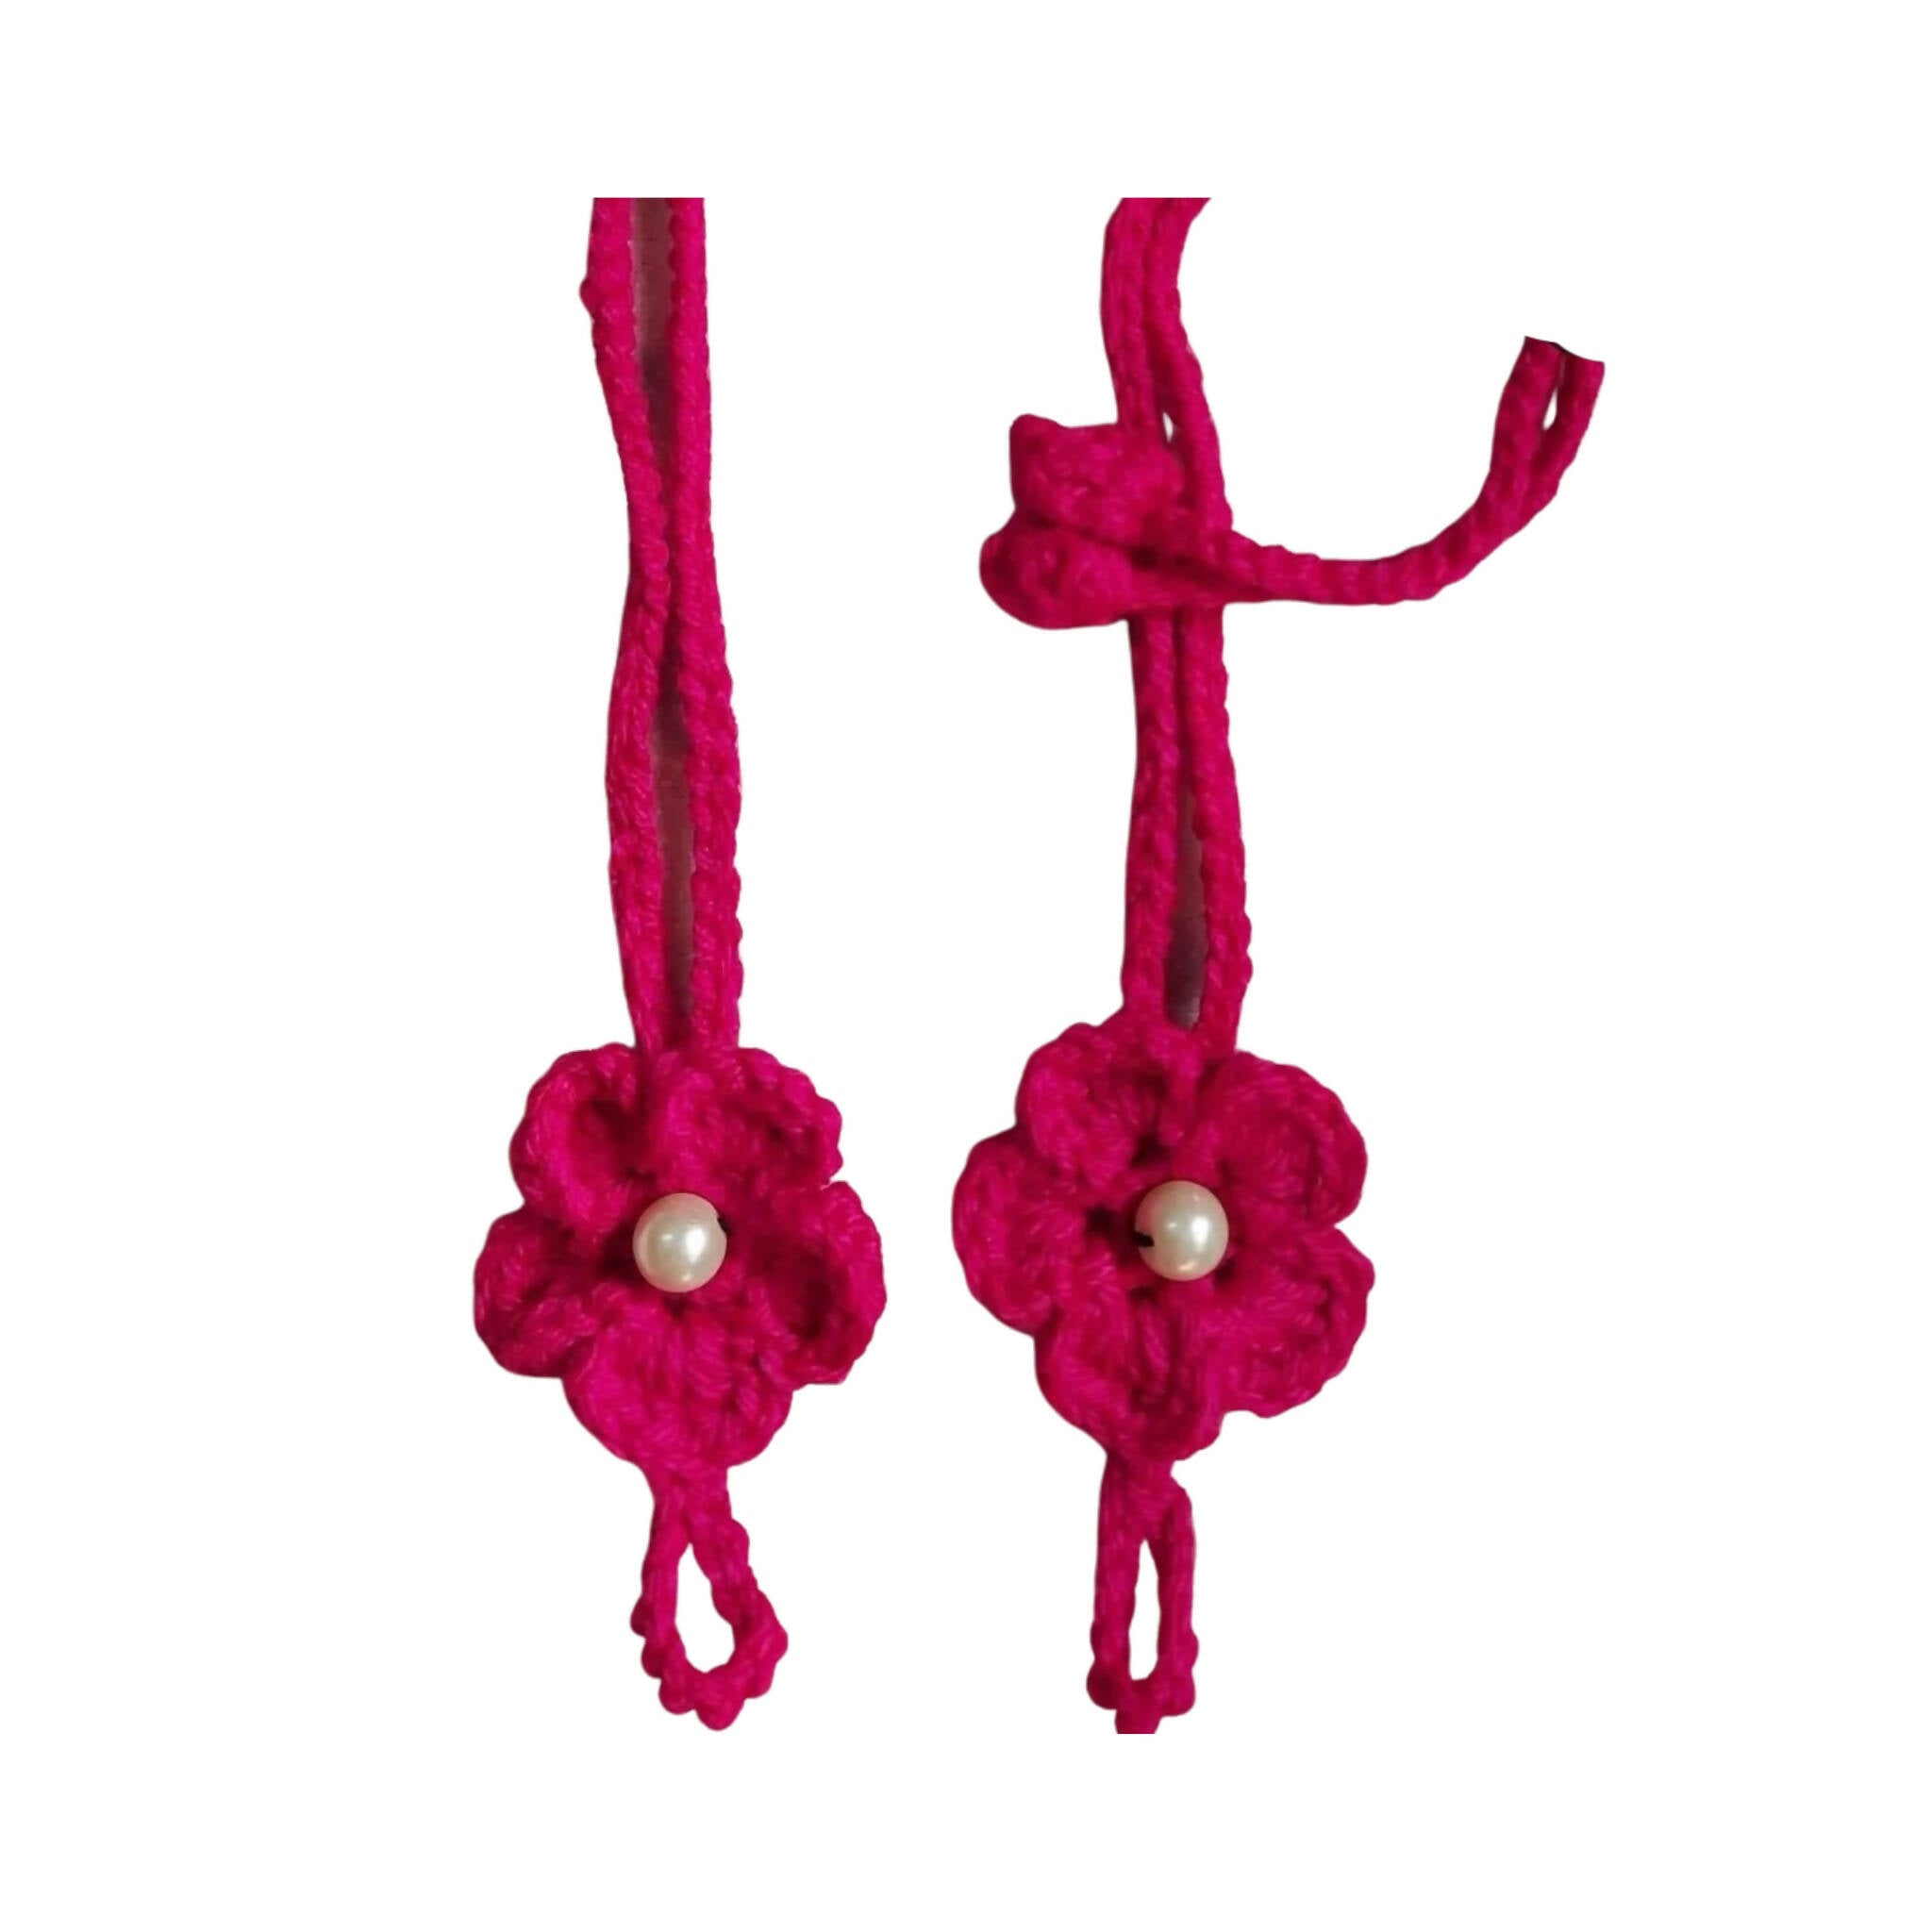 Barefoot Sandals, Stylish & Trendy, for Kids'